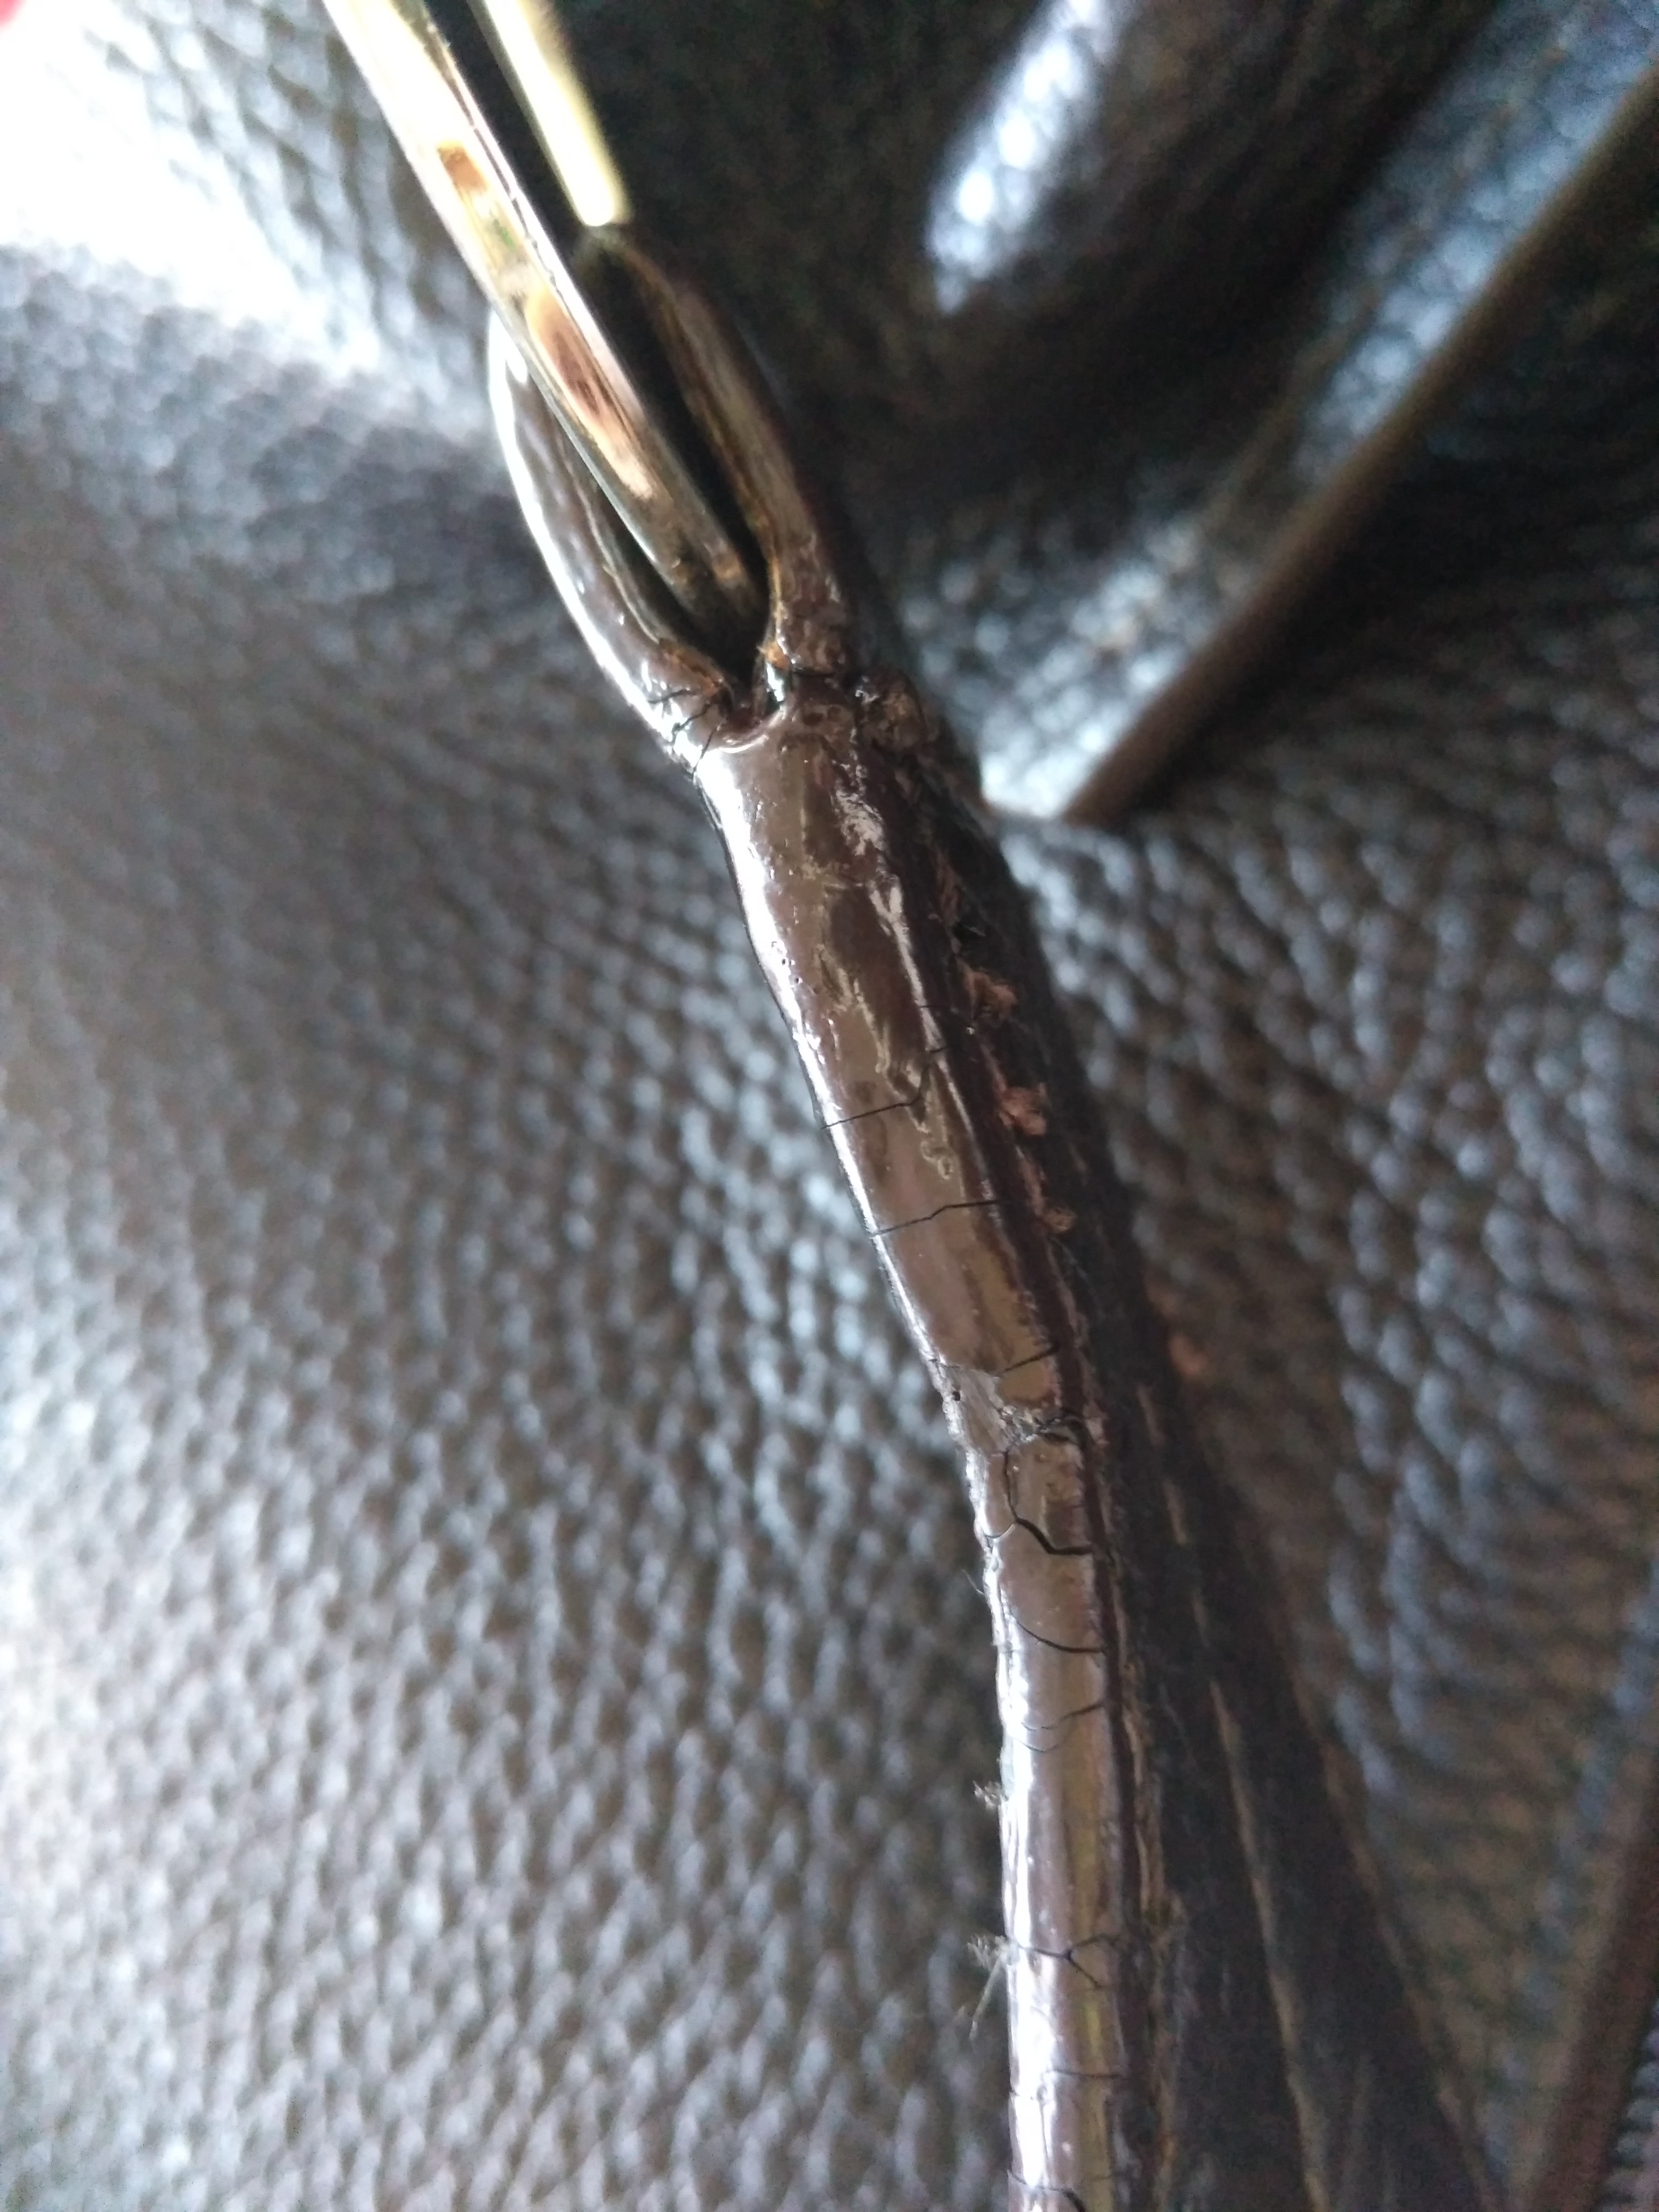 How to Repair Cracking Leather on a Purse Strap  Leather purses, Leather, Leather  handbag purse